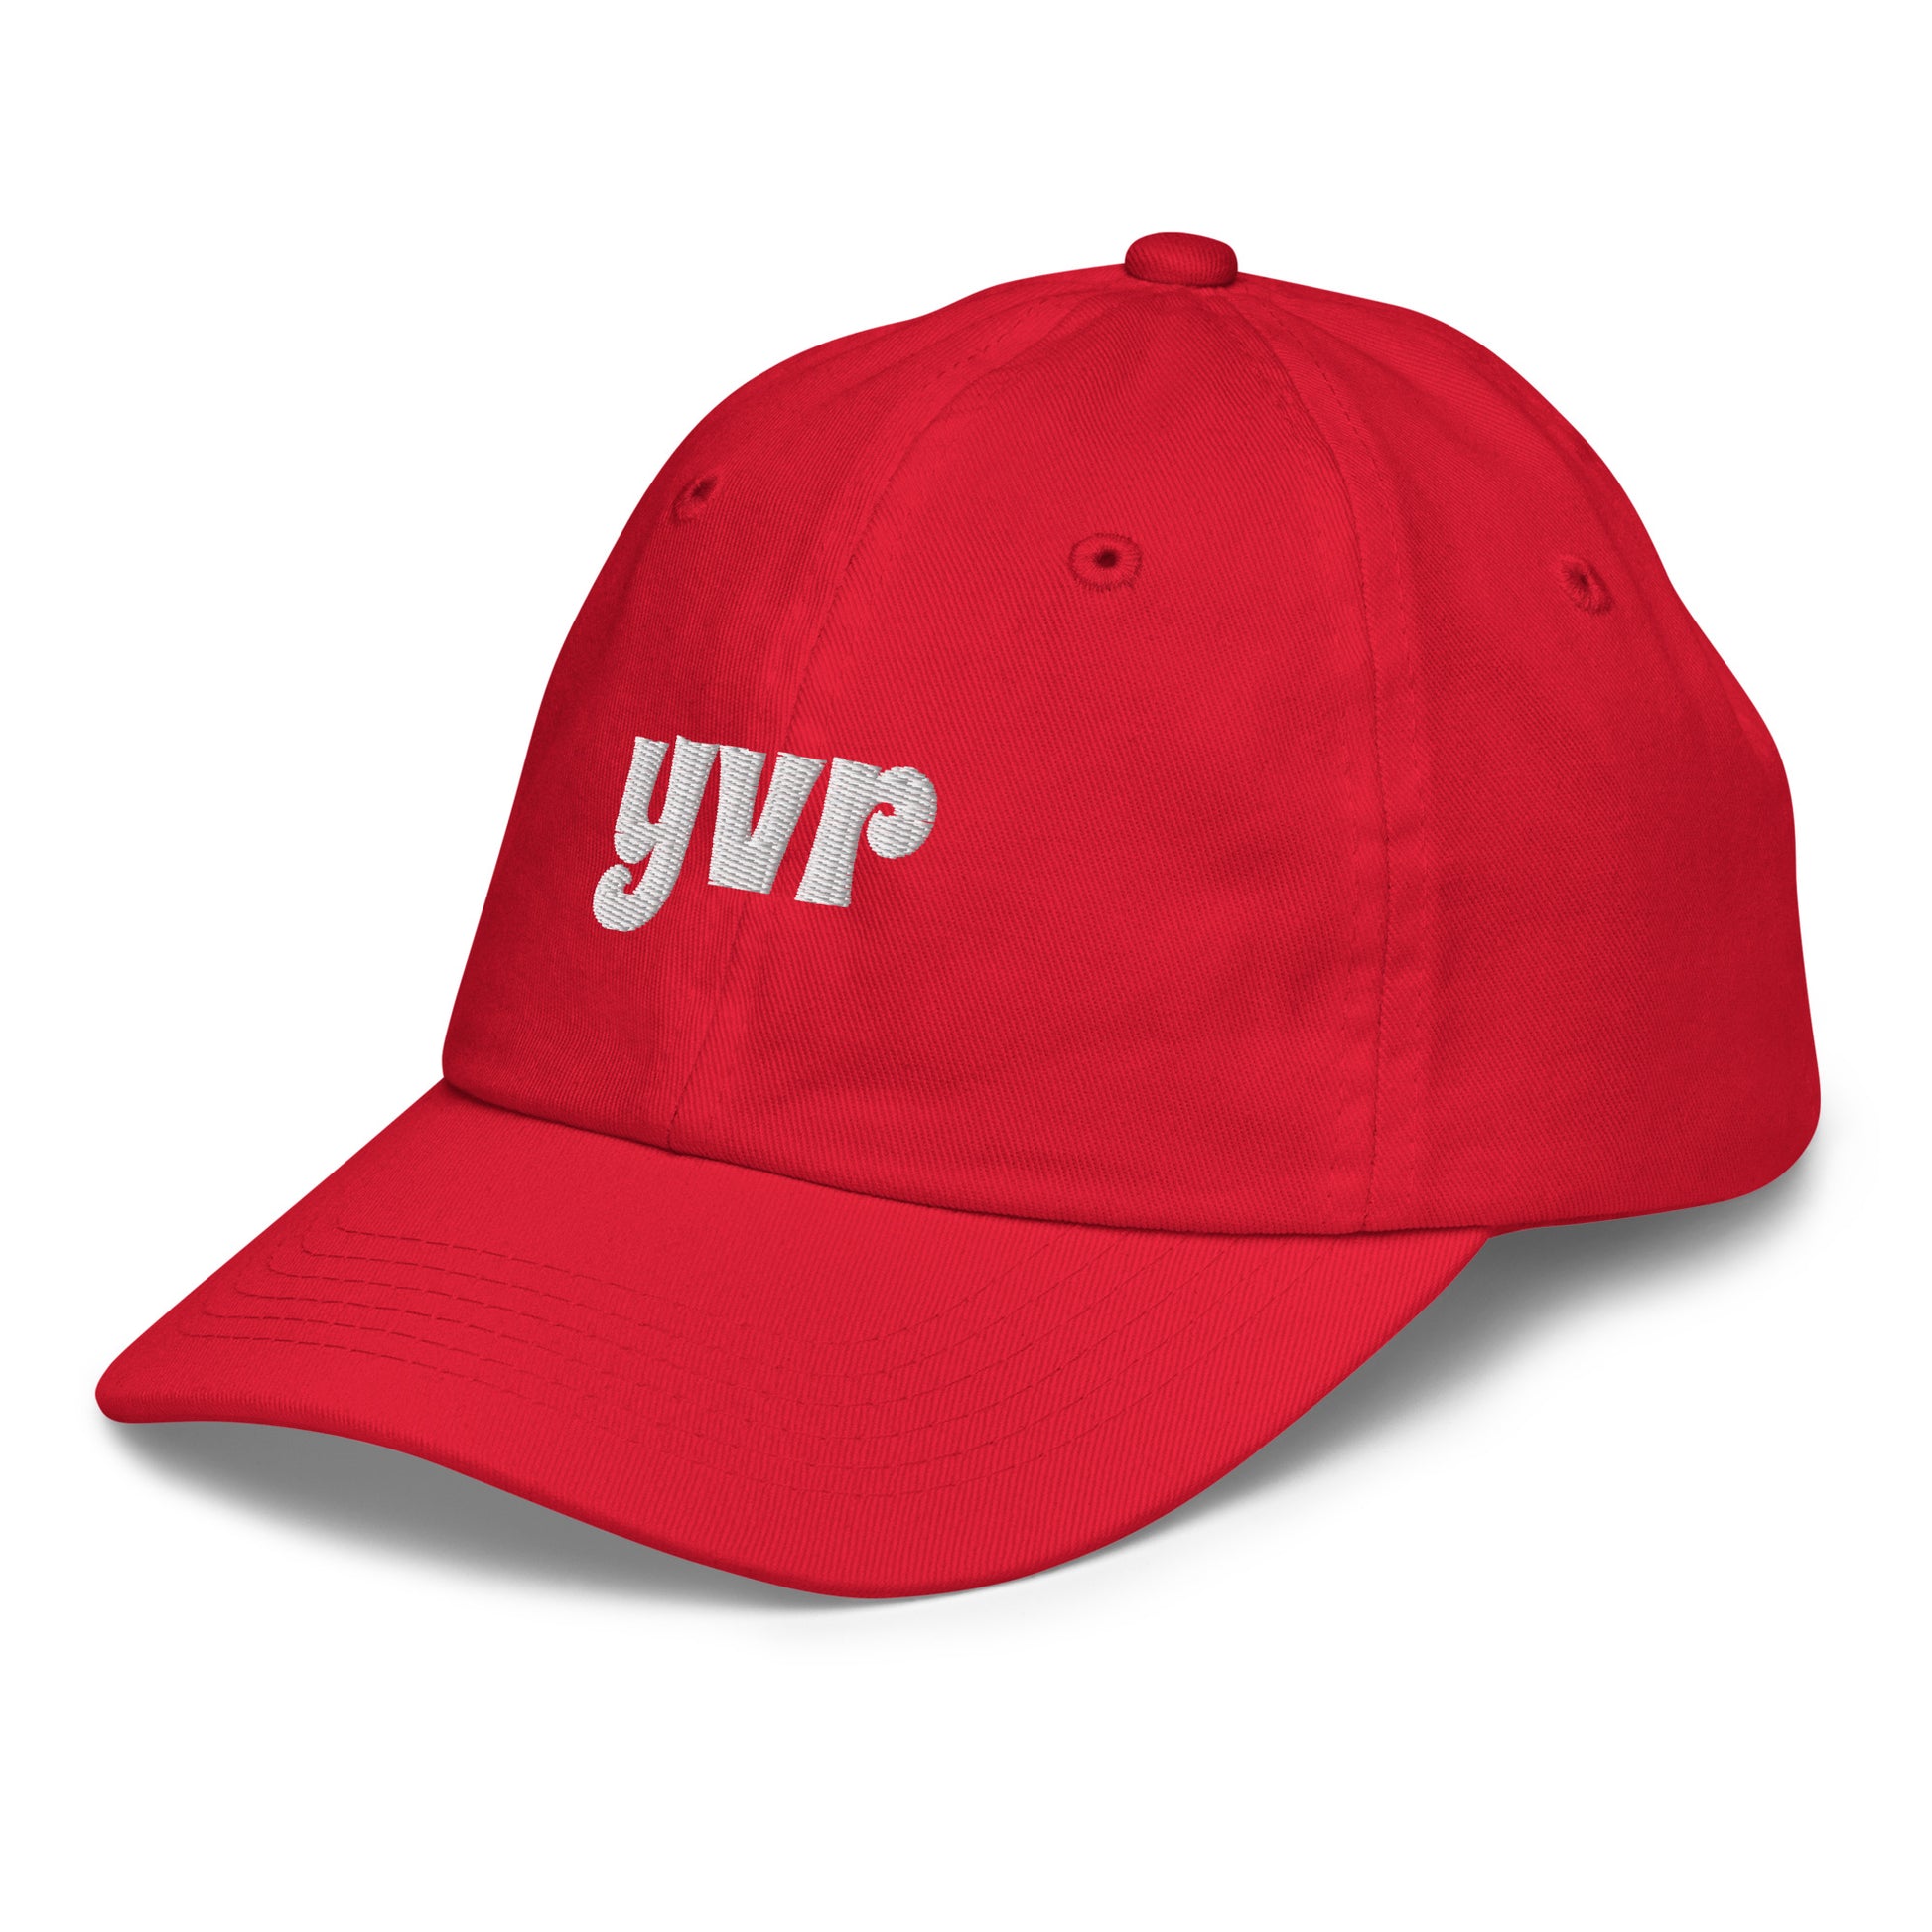 Groovy Kid's Baseball Cap - White • YVR Vancouver • YHM Designs - Image 14